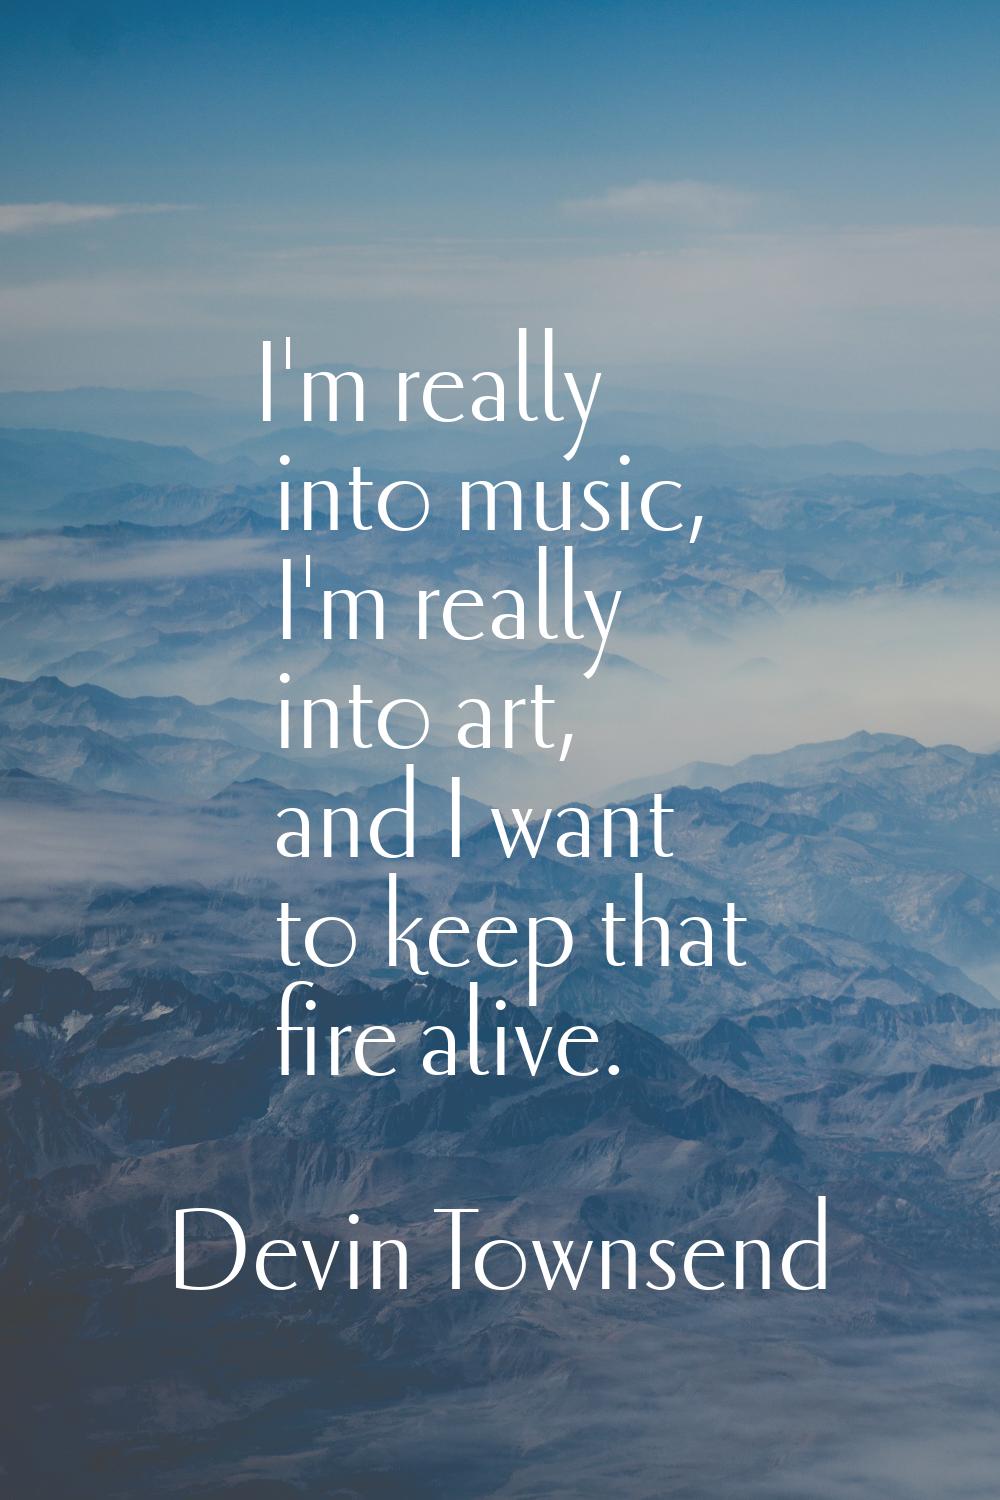 I'm really into music, I'm really into art, and I want to keep that fire alive.